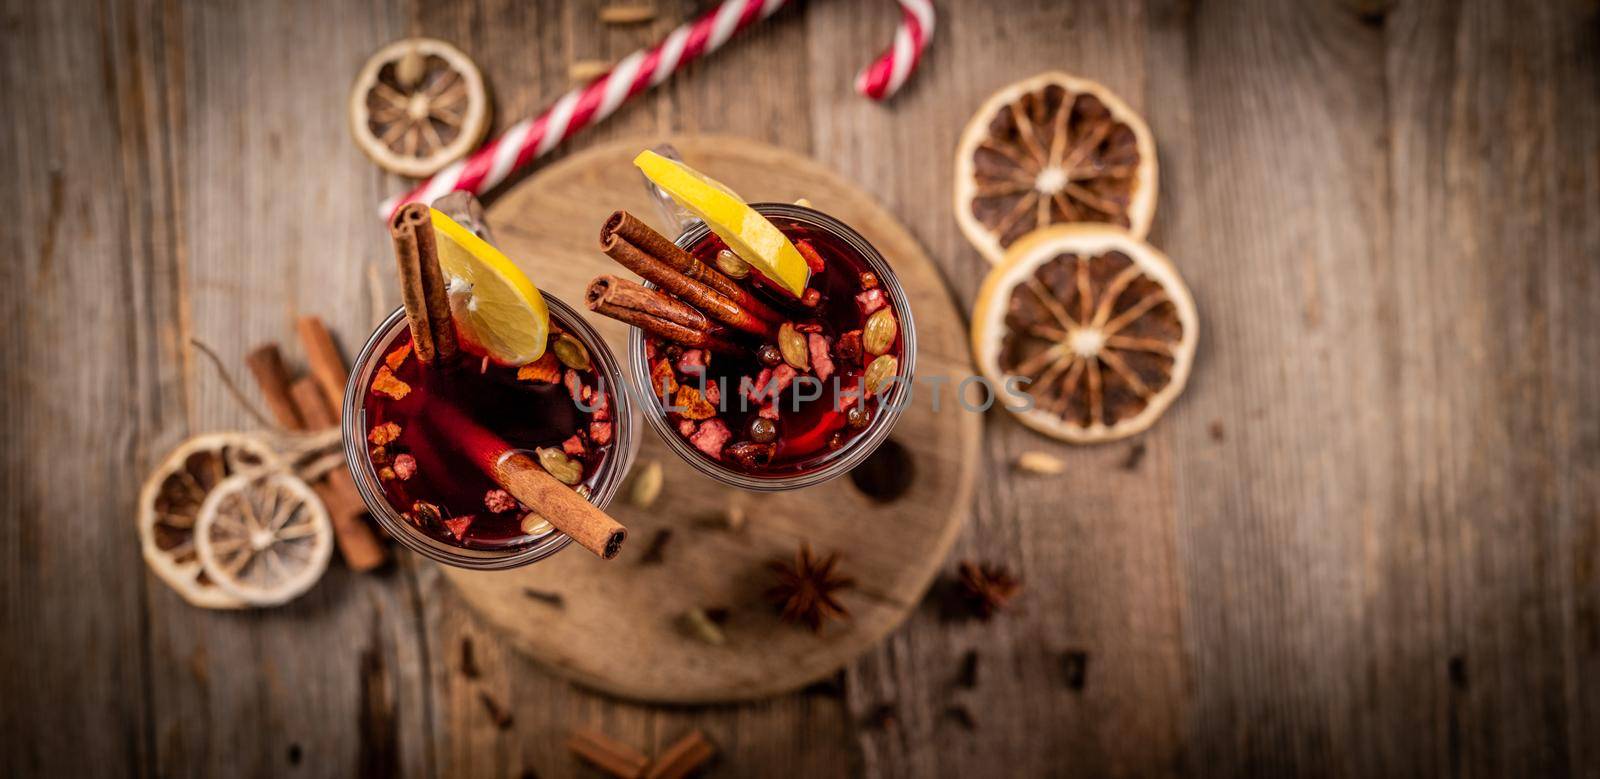 Top view of pair of glasses with aromatic mulled wine standing on wooden background